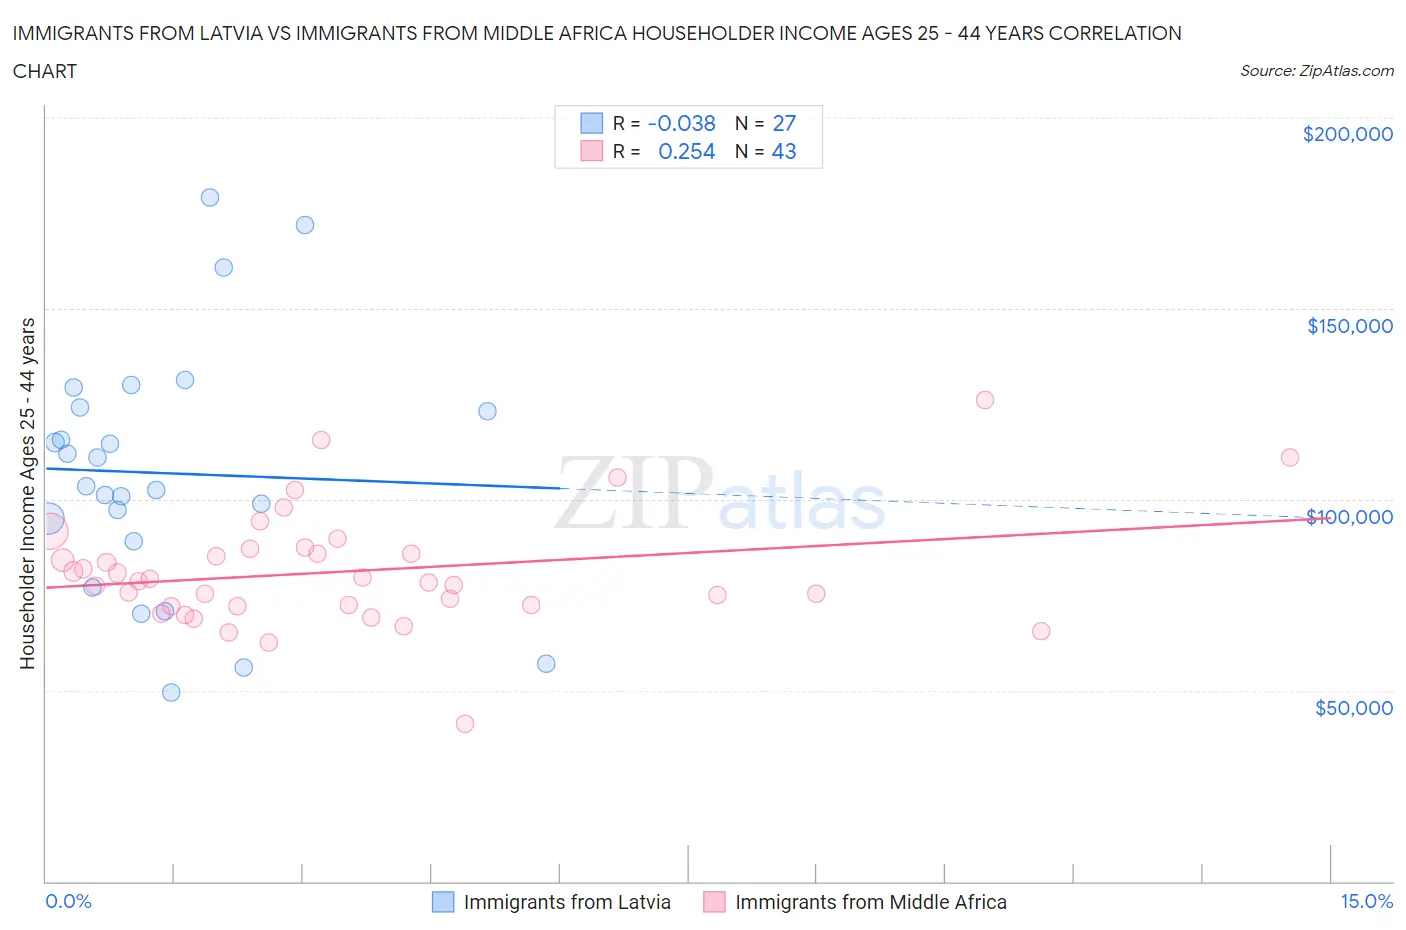 Immigrants from Latvia vs Immigrants from Middle Africa Householder Income Ages 25 - 44 years